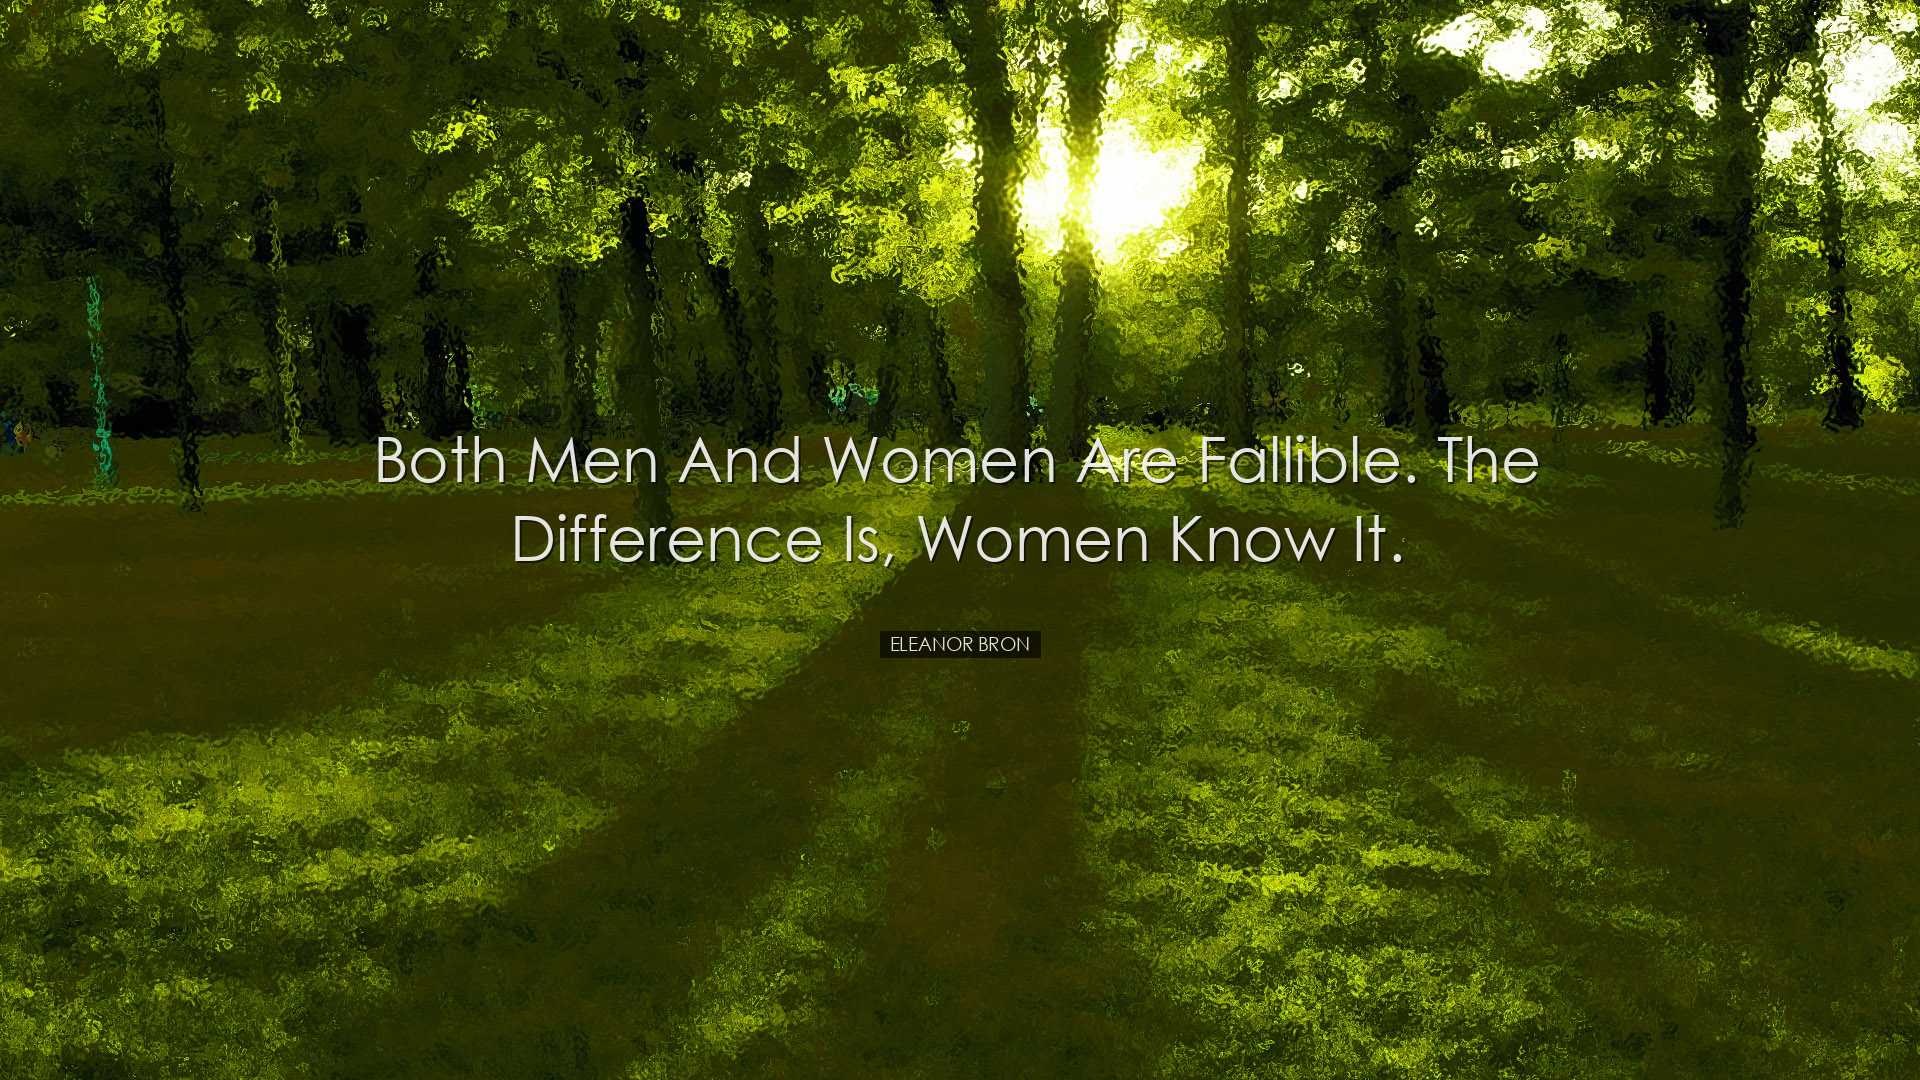 Both men and women are fallible. The difference is, women know it.